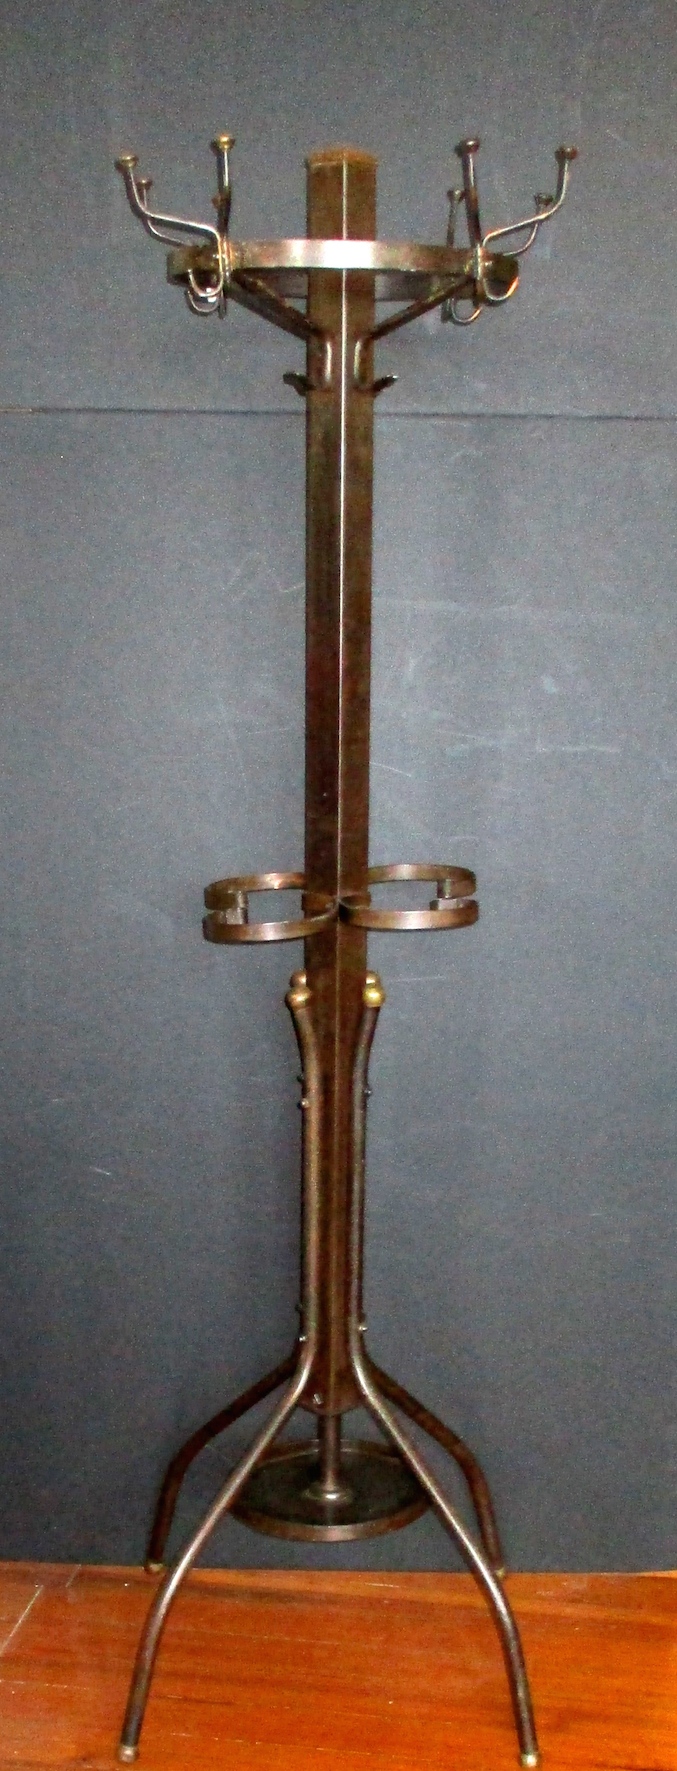 Brass and Iron Hat and Coat Stand w/ japanned Accents (70" Tall x 27" Base)